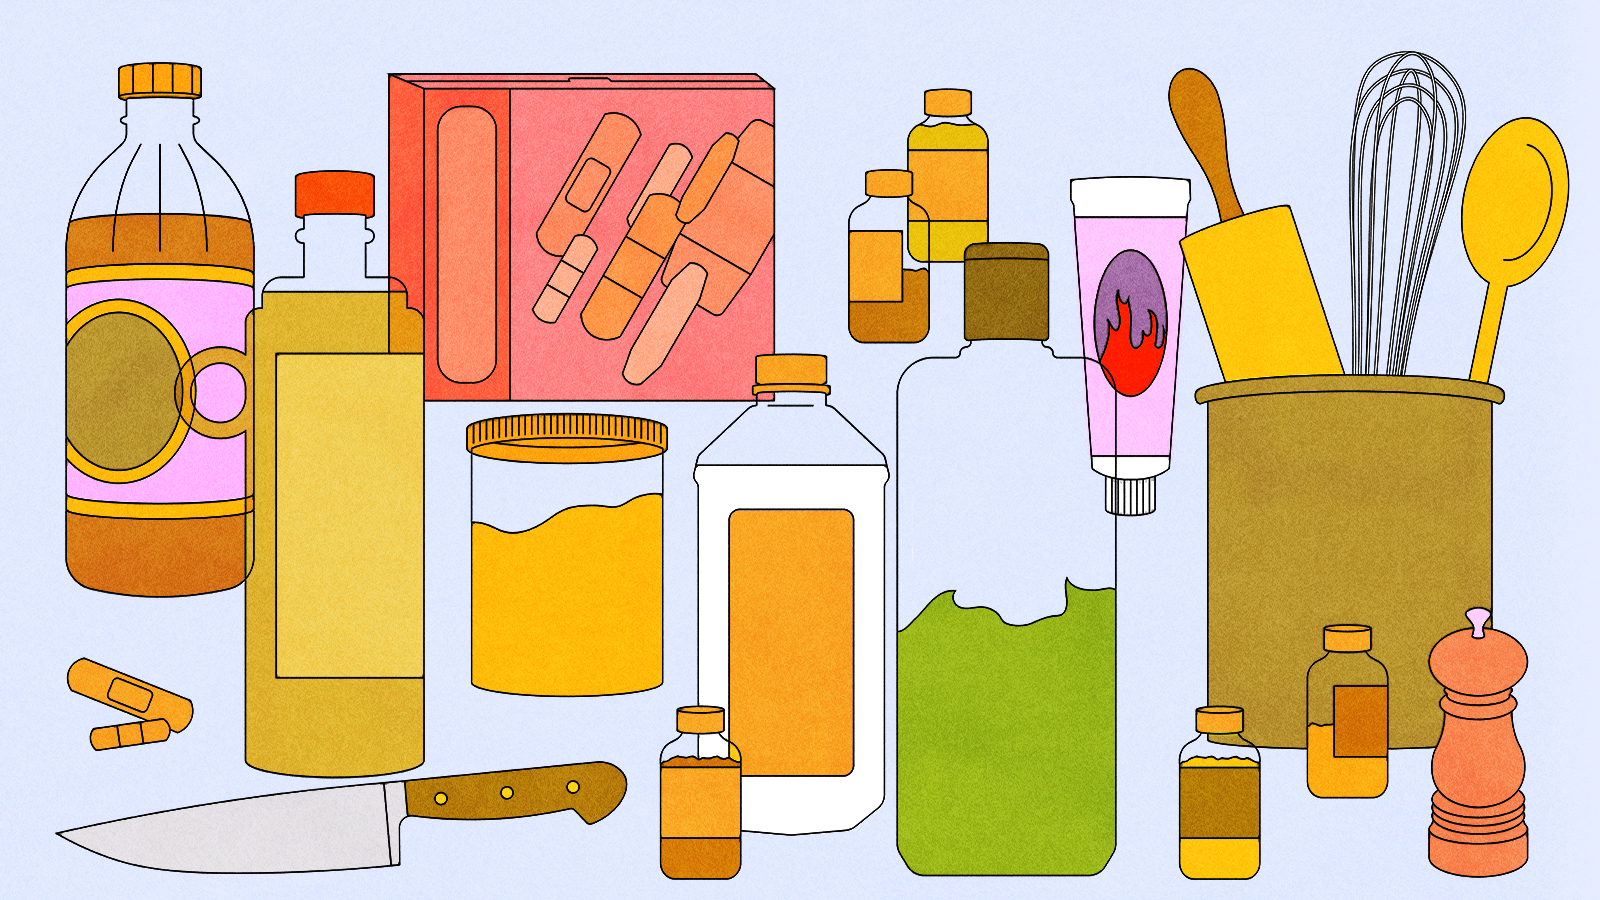 Band-Aids, burn cream, and other first aid items sit among bottles of oil and vinegar, a kitchen knife, and a vessel holding a rolling pin, whisk, and spatula. Illustration.